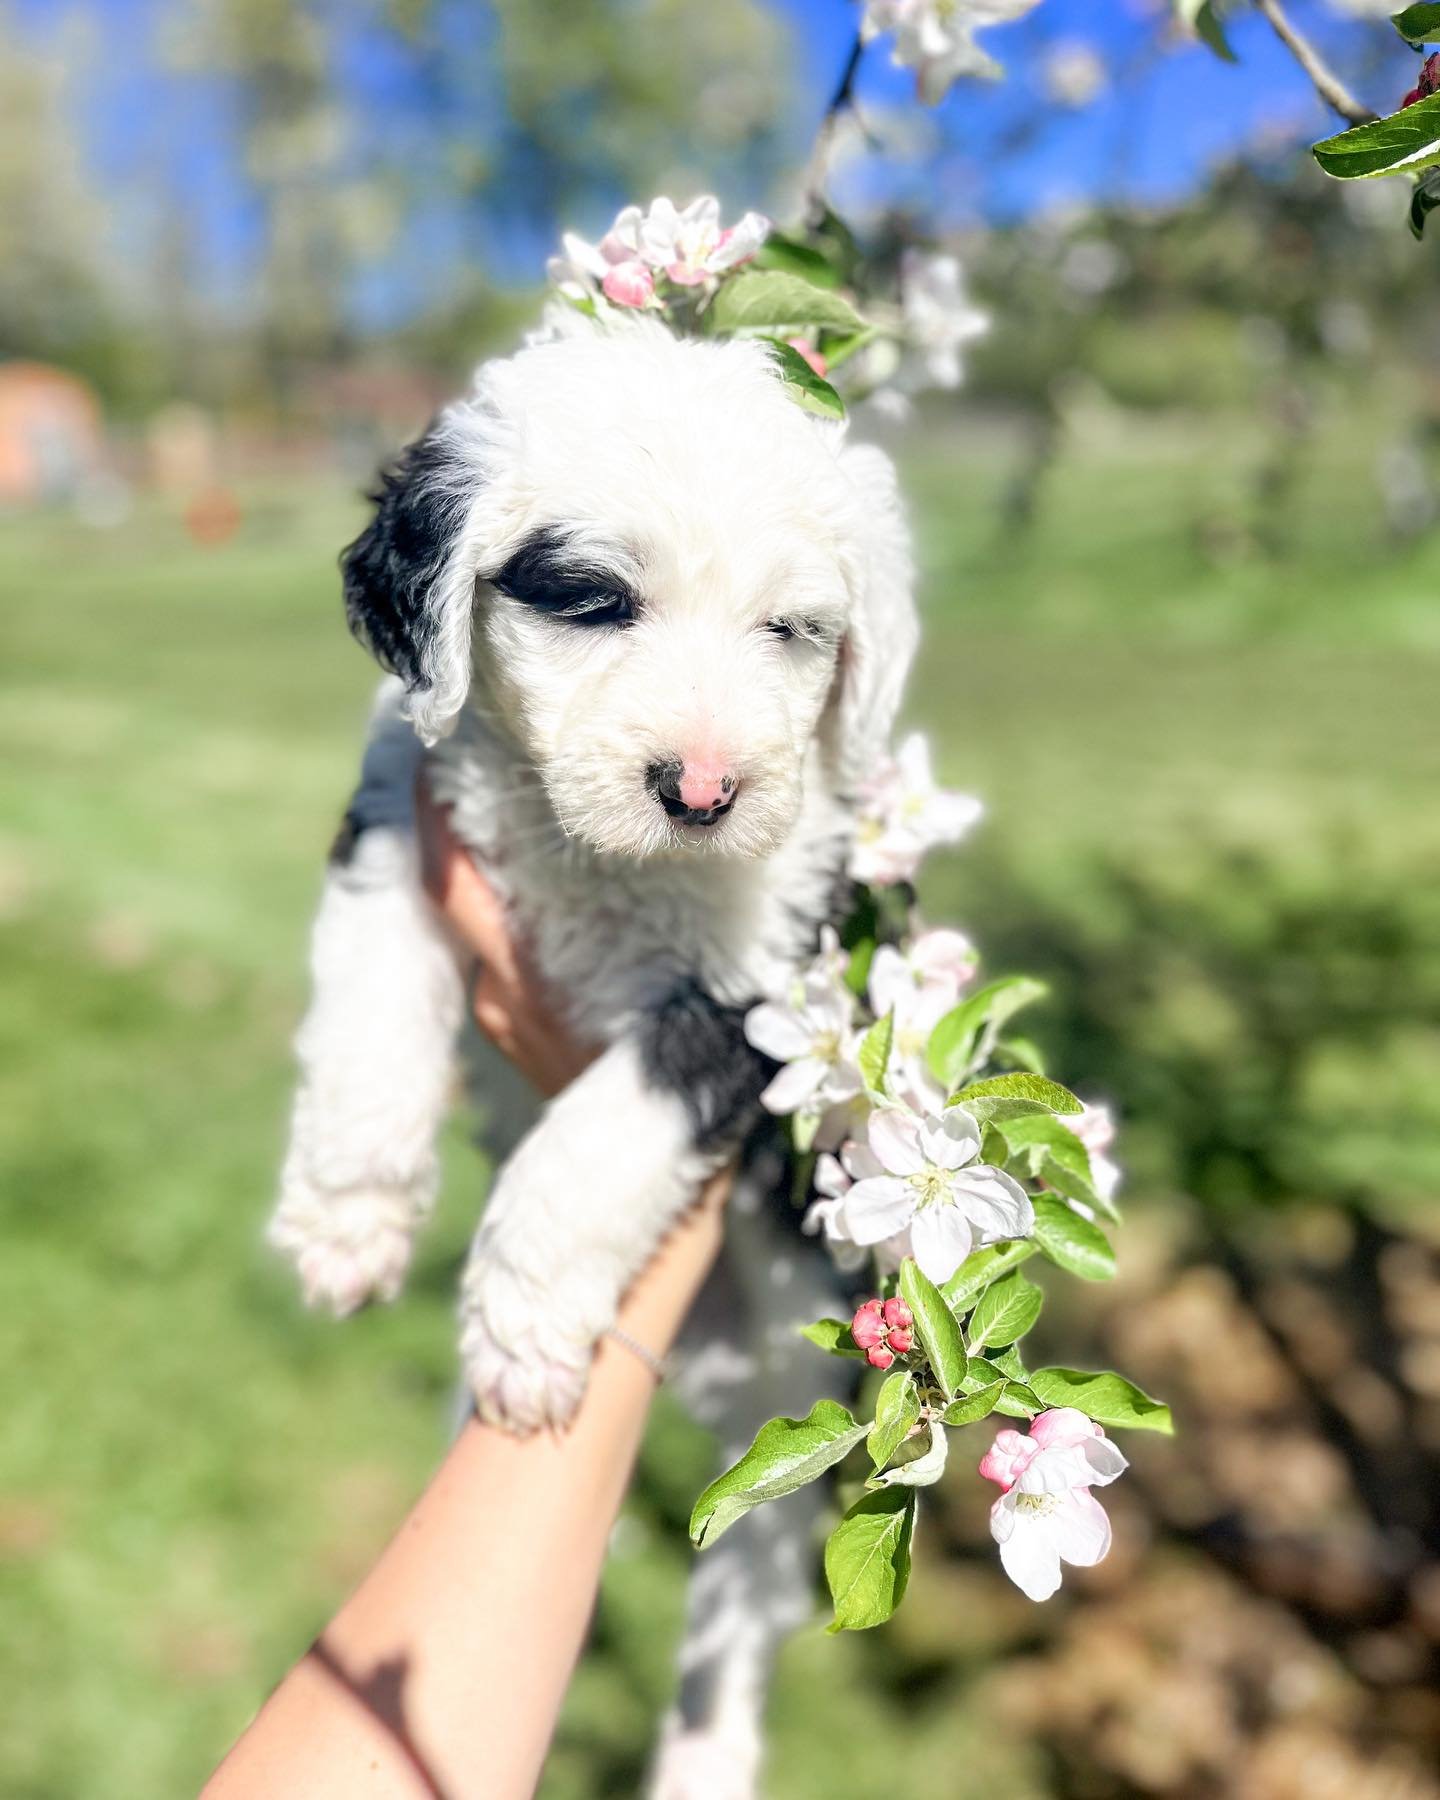 Available Puppies, meet Rainier, Shasta and Denali. they are standard F1 Sheepadoodles and will grow to be 70-80lbs they are incredibly sweet and smart, will have a wavy - little to non Shedding coat.
Dob 03/08/24 ready to go home early May. For more